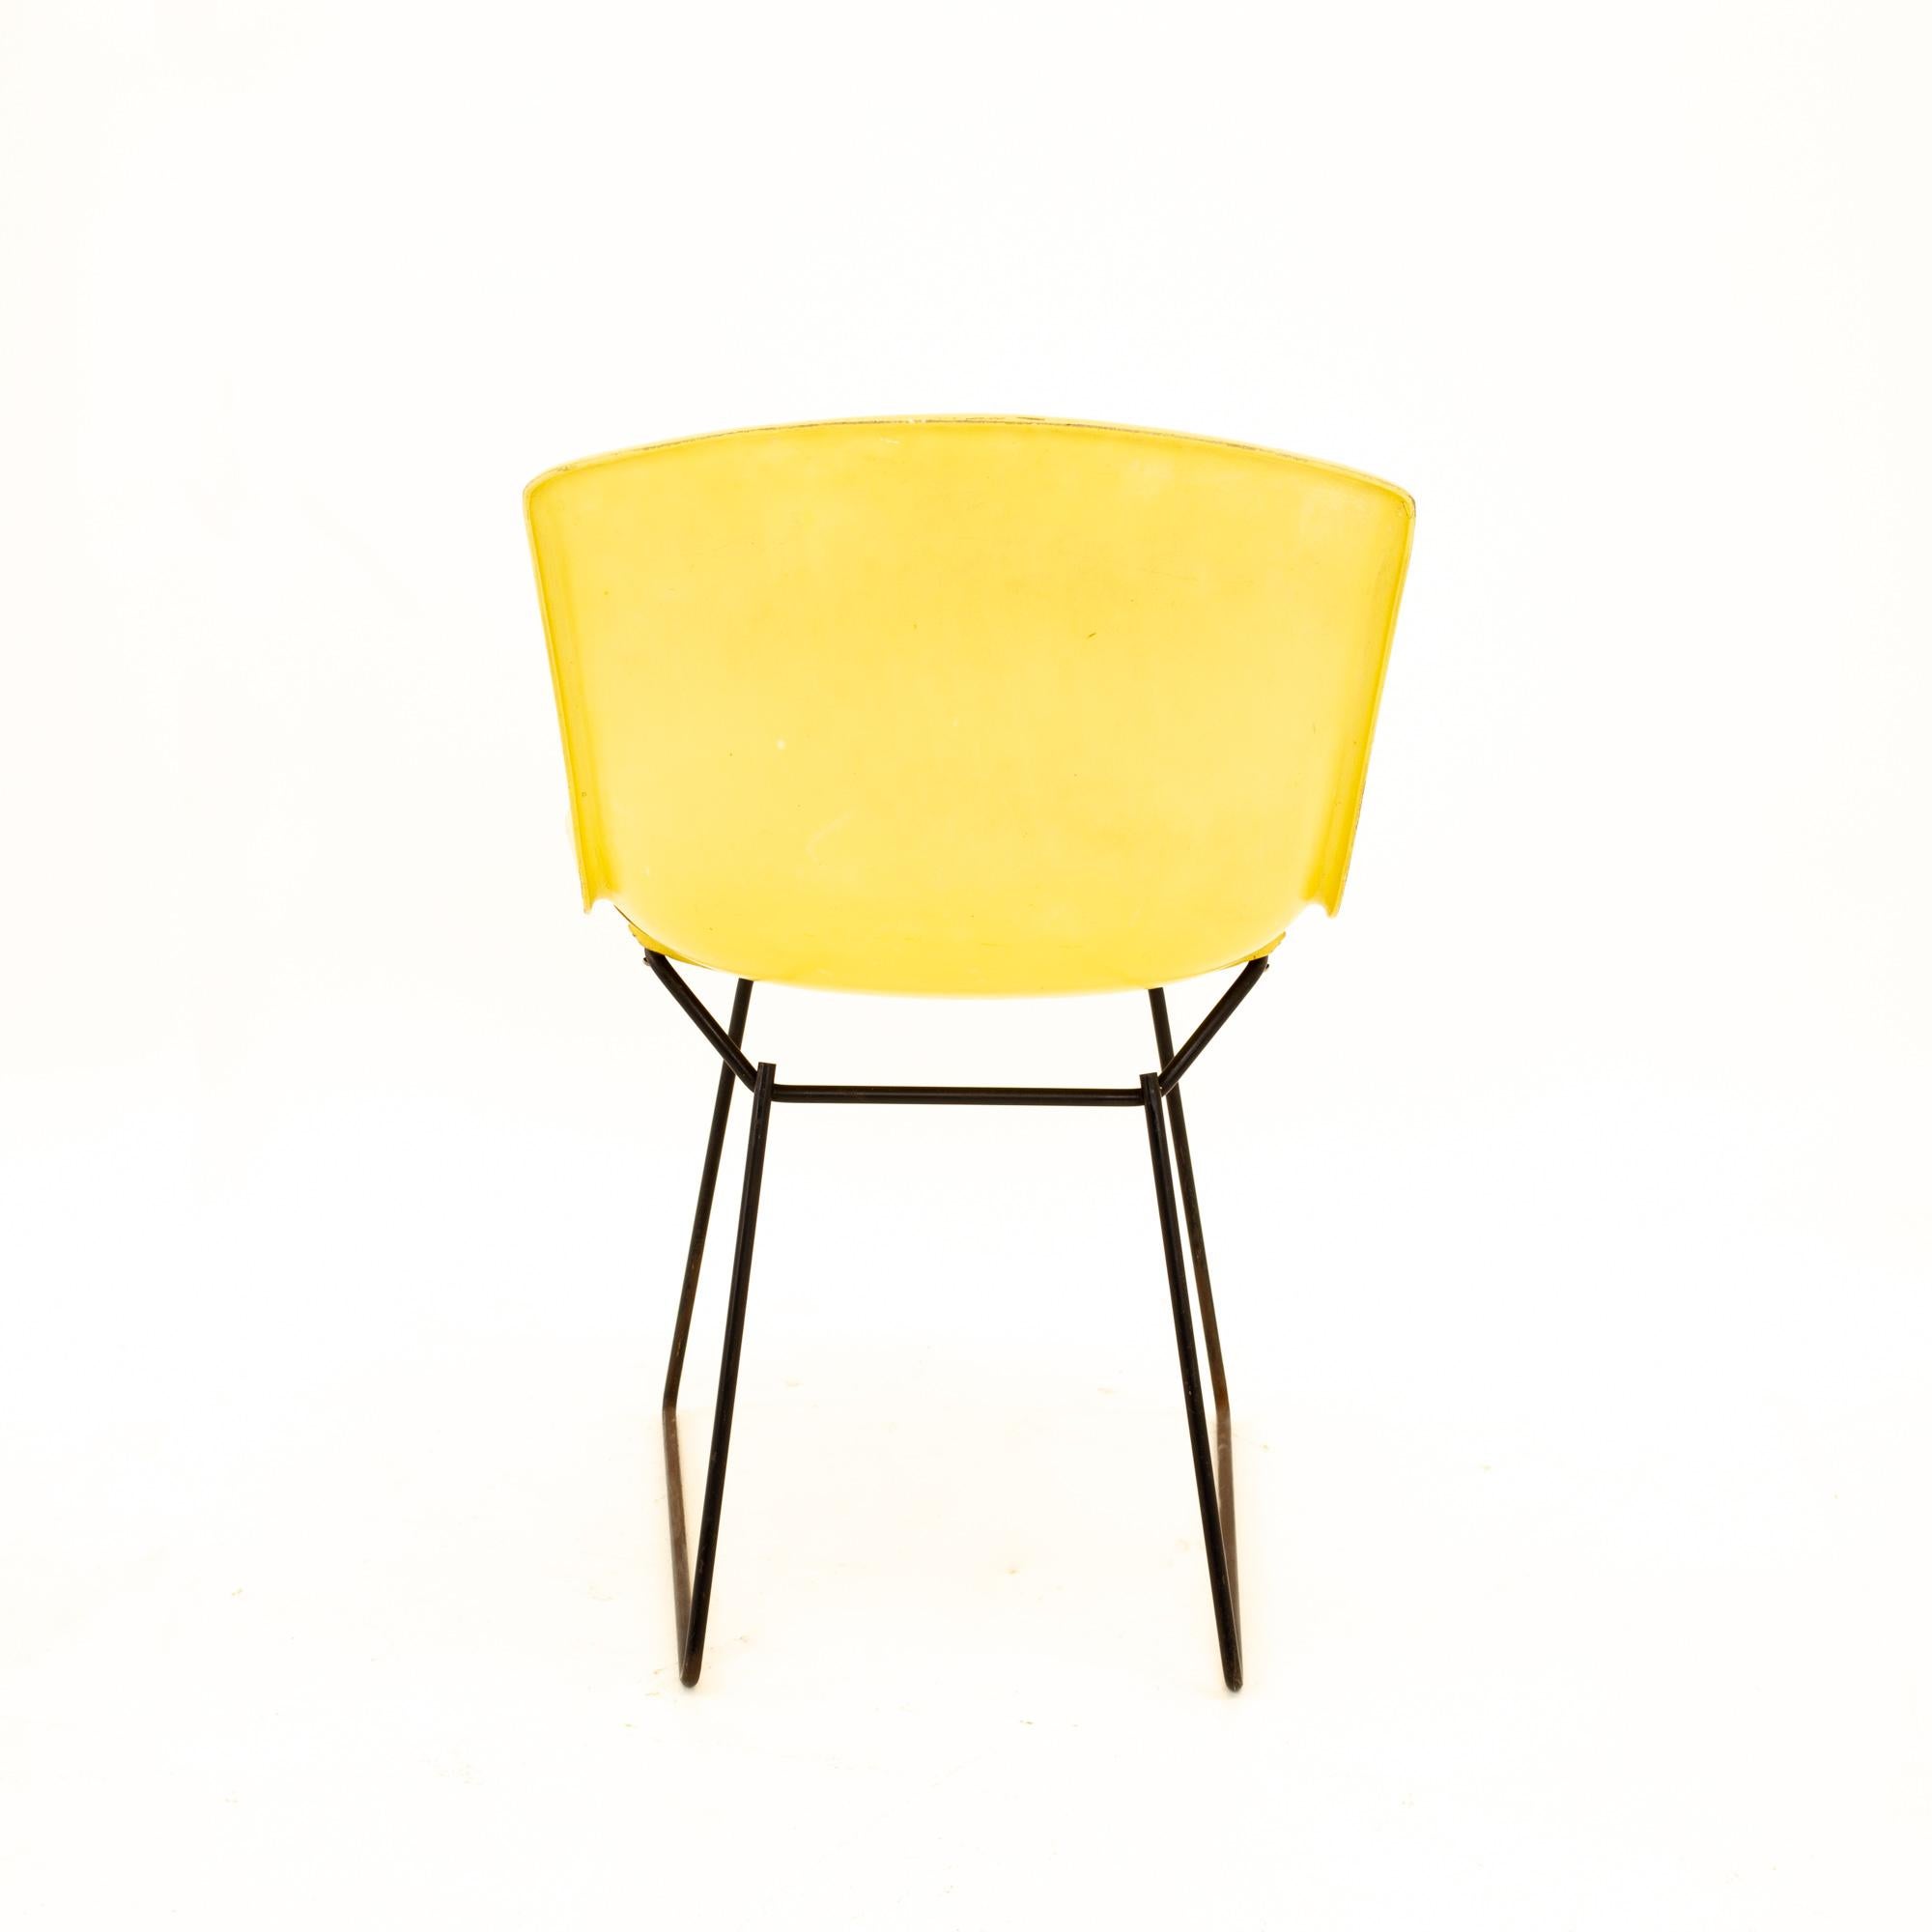 Late 20th Century Knoll Mid Century Yellow Fiberglass Side Chair, Pair For Sale